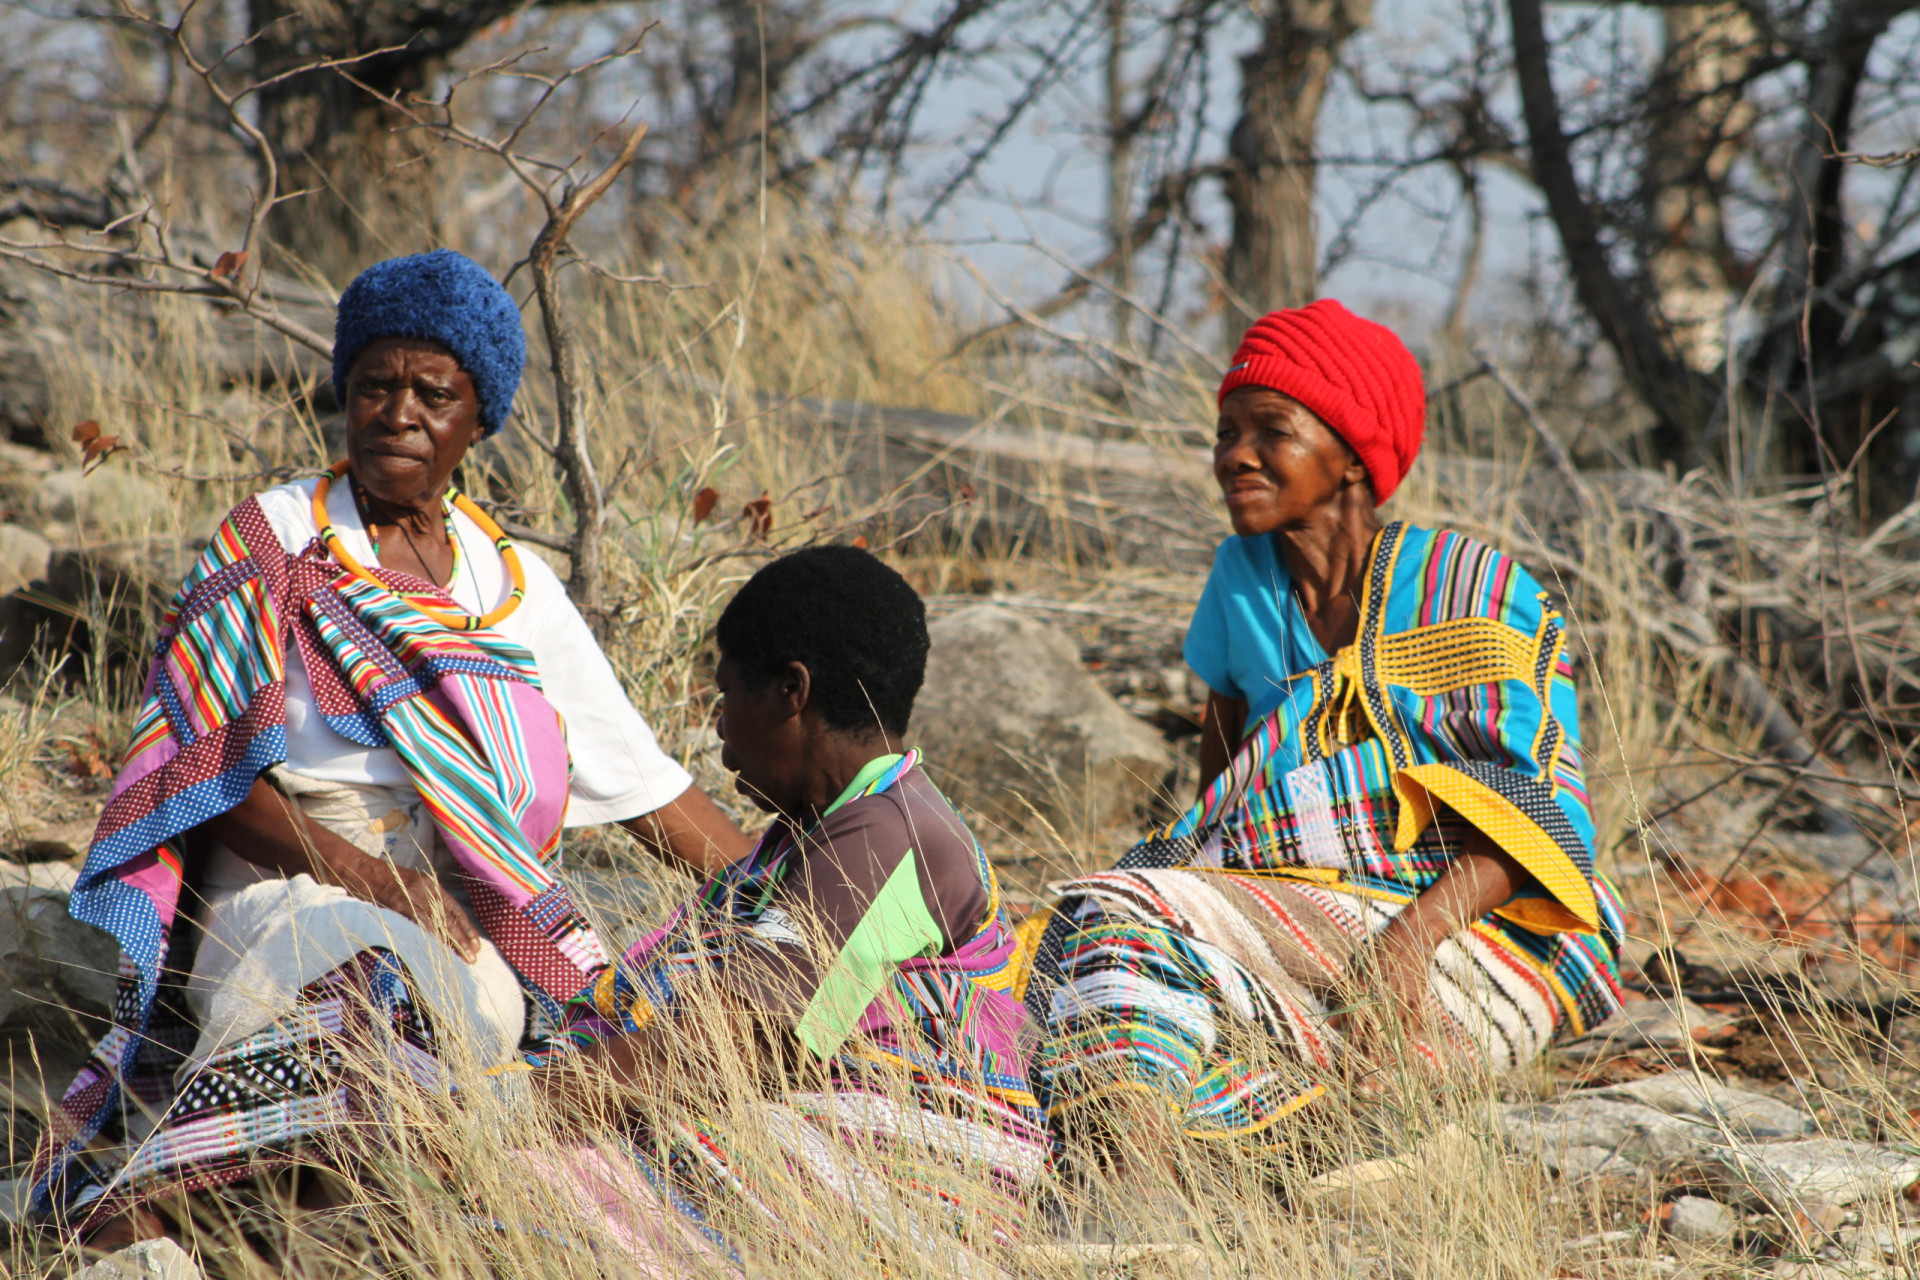 <p>The Venda people are most notable for their beliefs in ancestral spirits and their worship of the python as a sacred animal.</p><p><a href="https://www.msn.com/en-us/community/channel/vid-7xx8mnucu55yw63we9va2gwr7uihbxwc68fxqp25x6tg4ftibpra?cvid=94631541bc0f4f89bfd59158d696ad7e">Follow us and access great exclusive content every day</a></p>